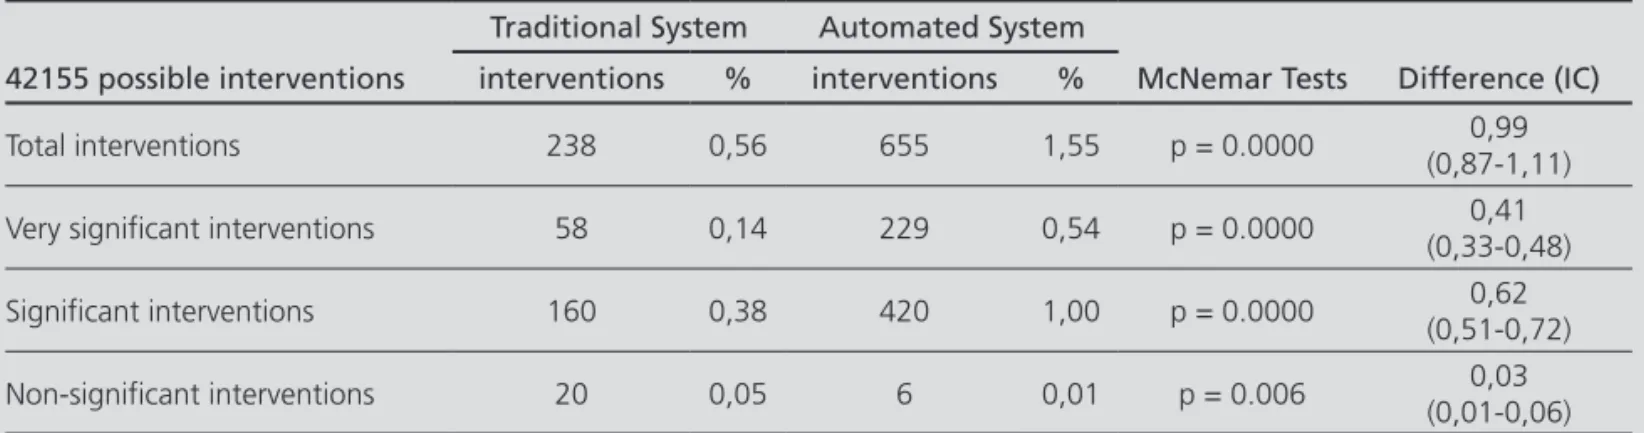 Table 2. Percentage of interventions per possible interventions adding those that would have been automatically detected Traditional System Automated System